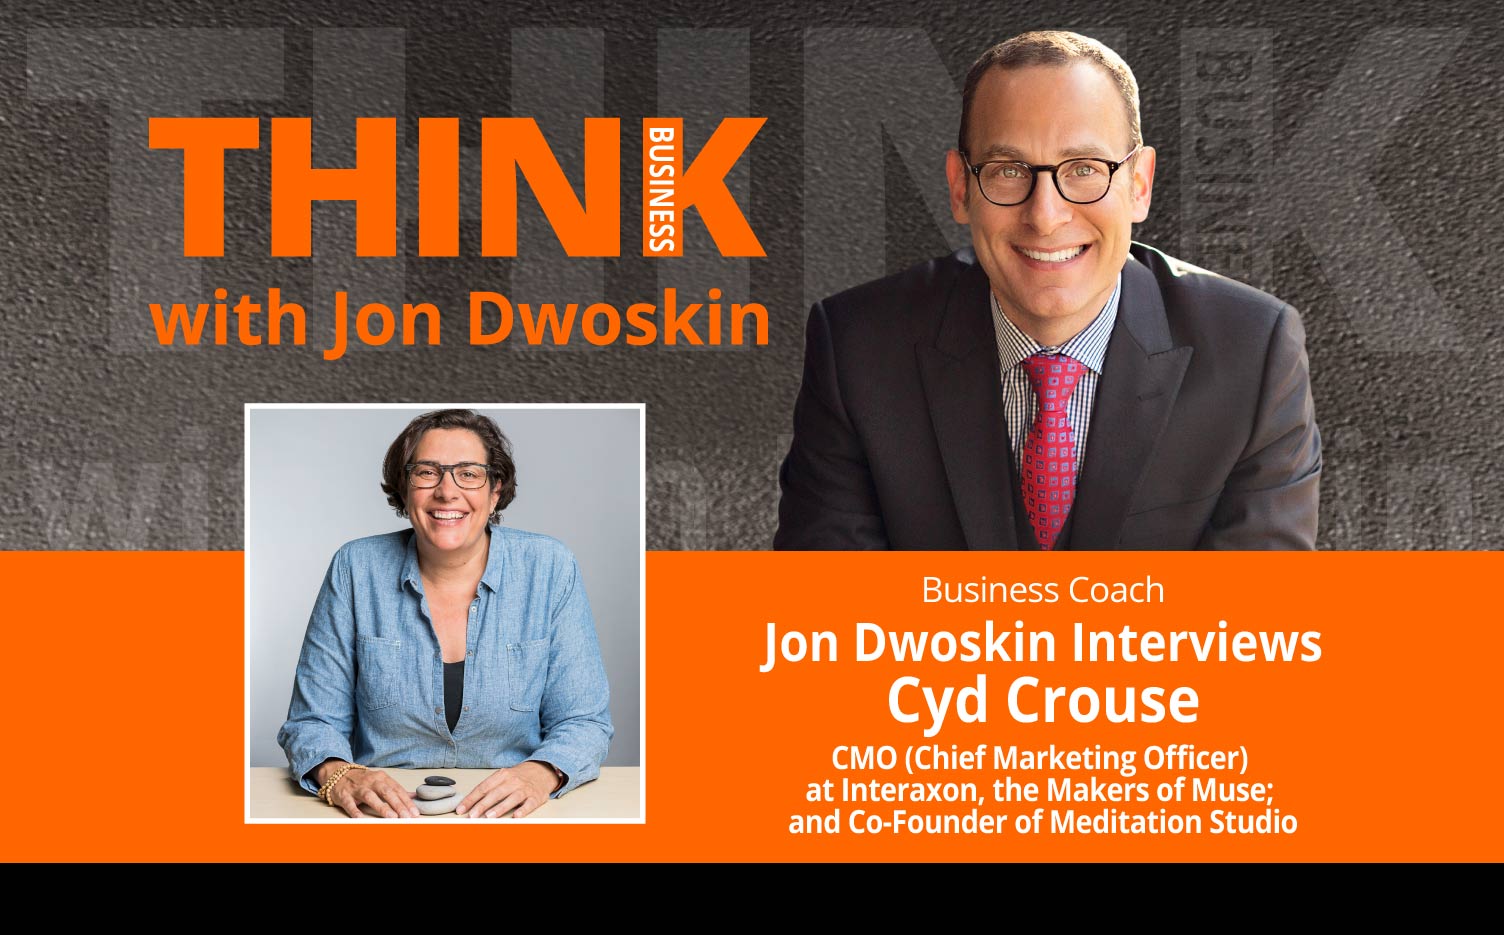 THINK Business Podcast: Jon Dwoskin Interviews Cyd Crouse, CMO (Chief Marketing Officer) at Interaxon, the Makers of Muse; and Co-Founder of Meditation Studio